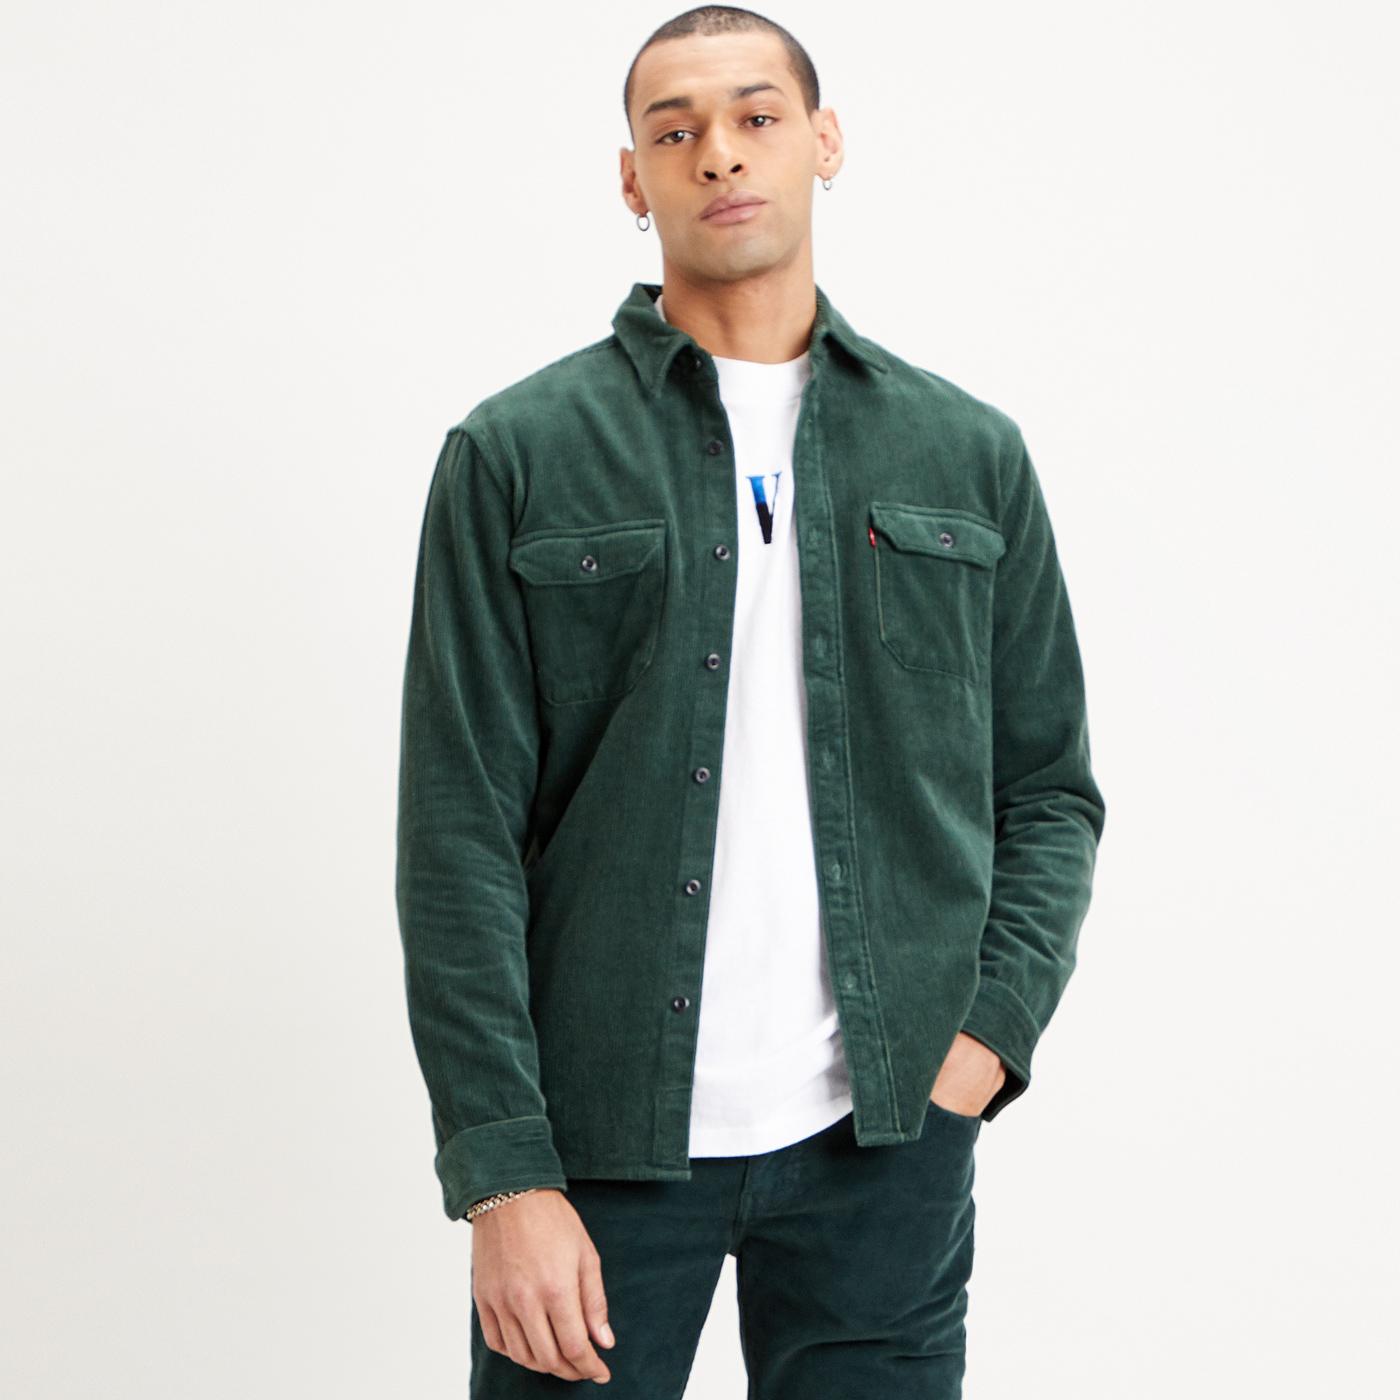 LEVI'S Jackson Retro Cord Worker Over Shirt in Python Green